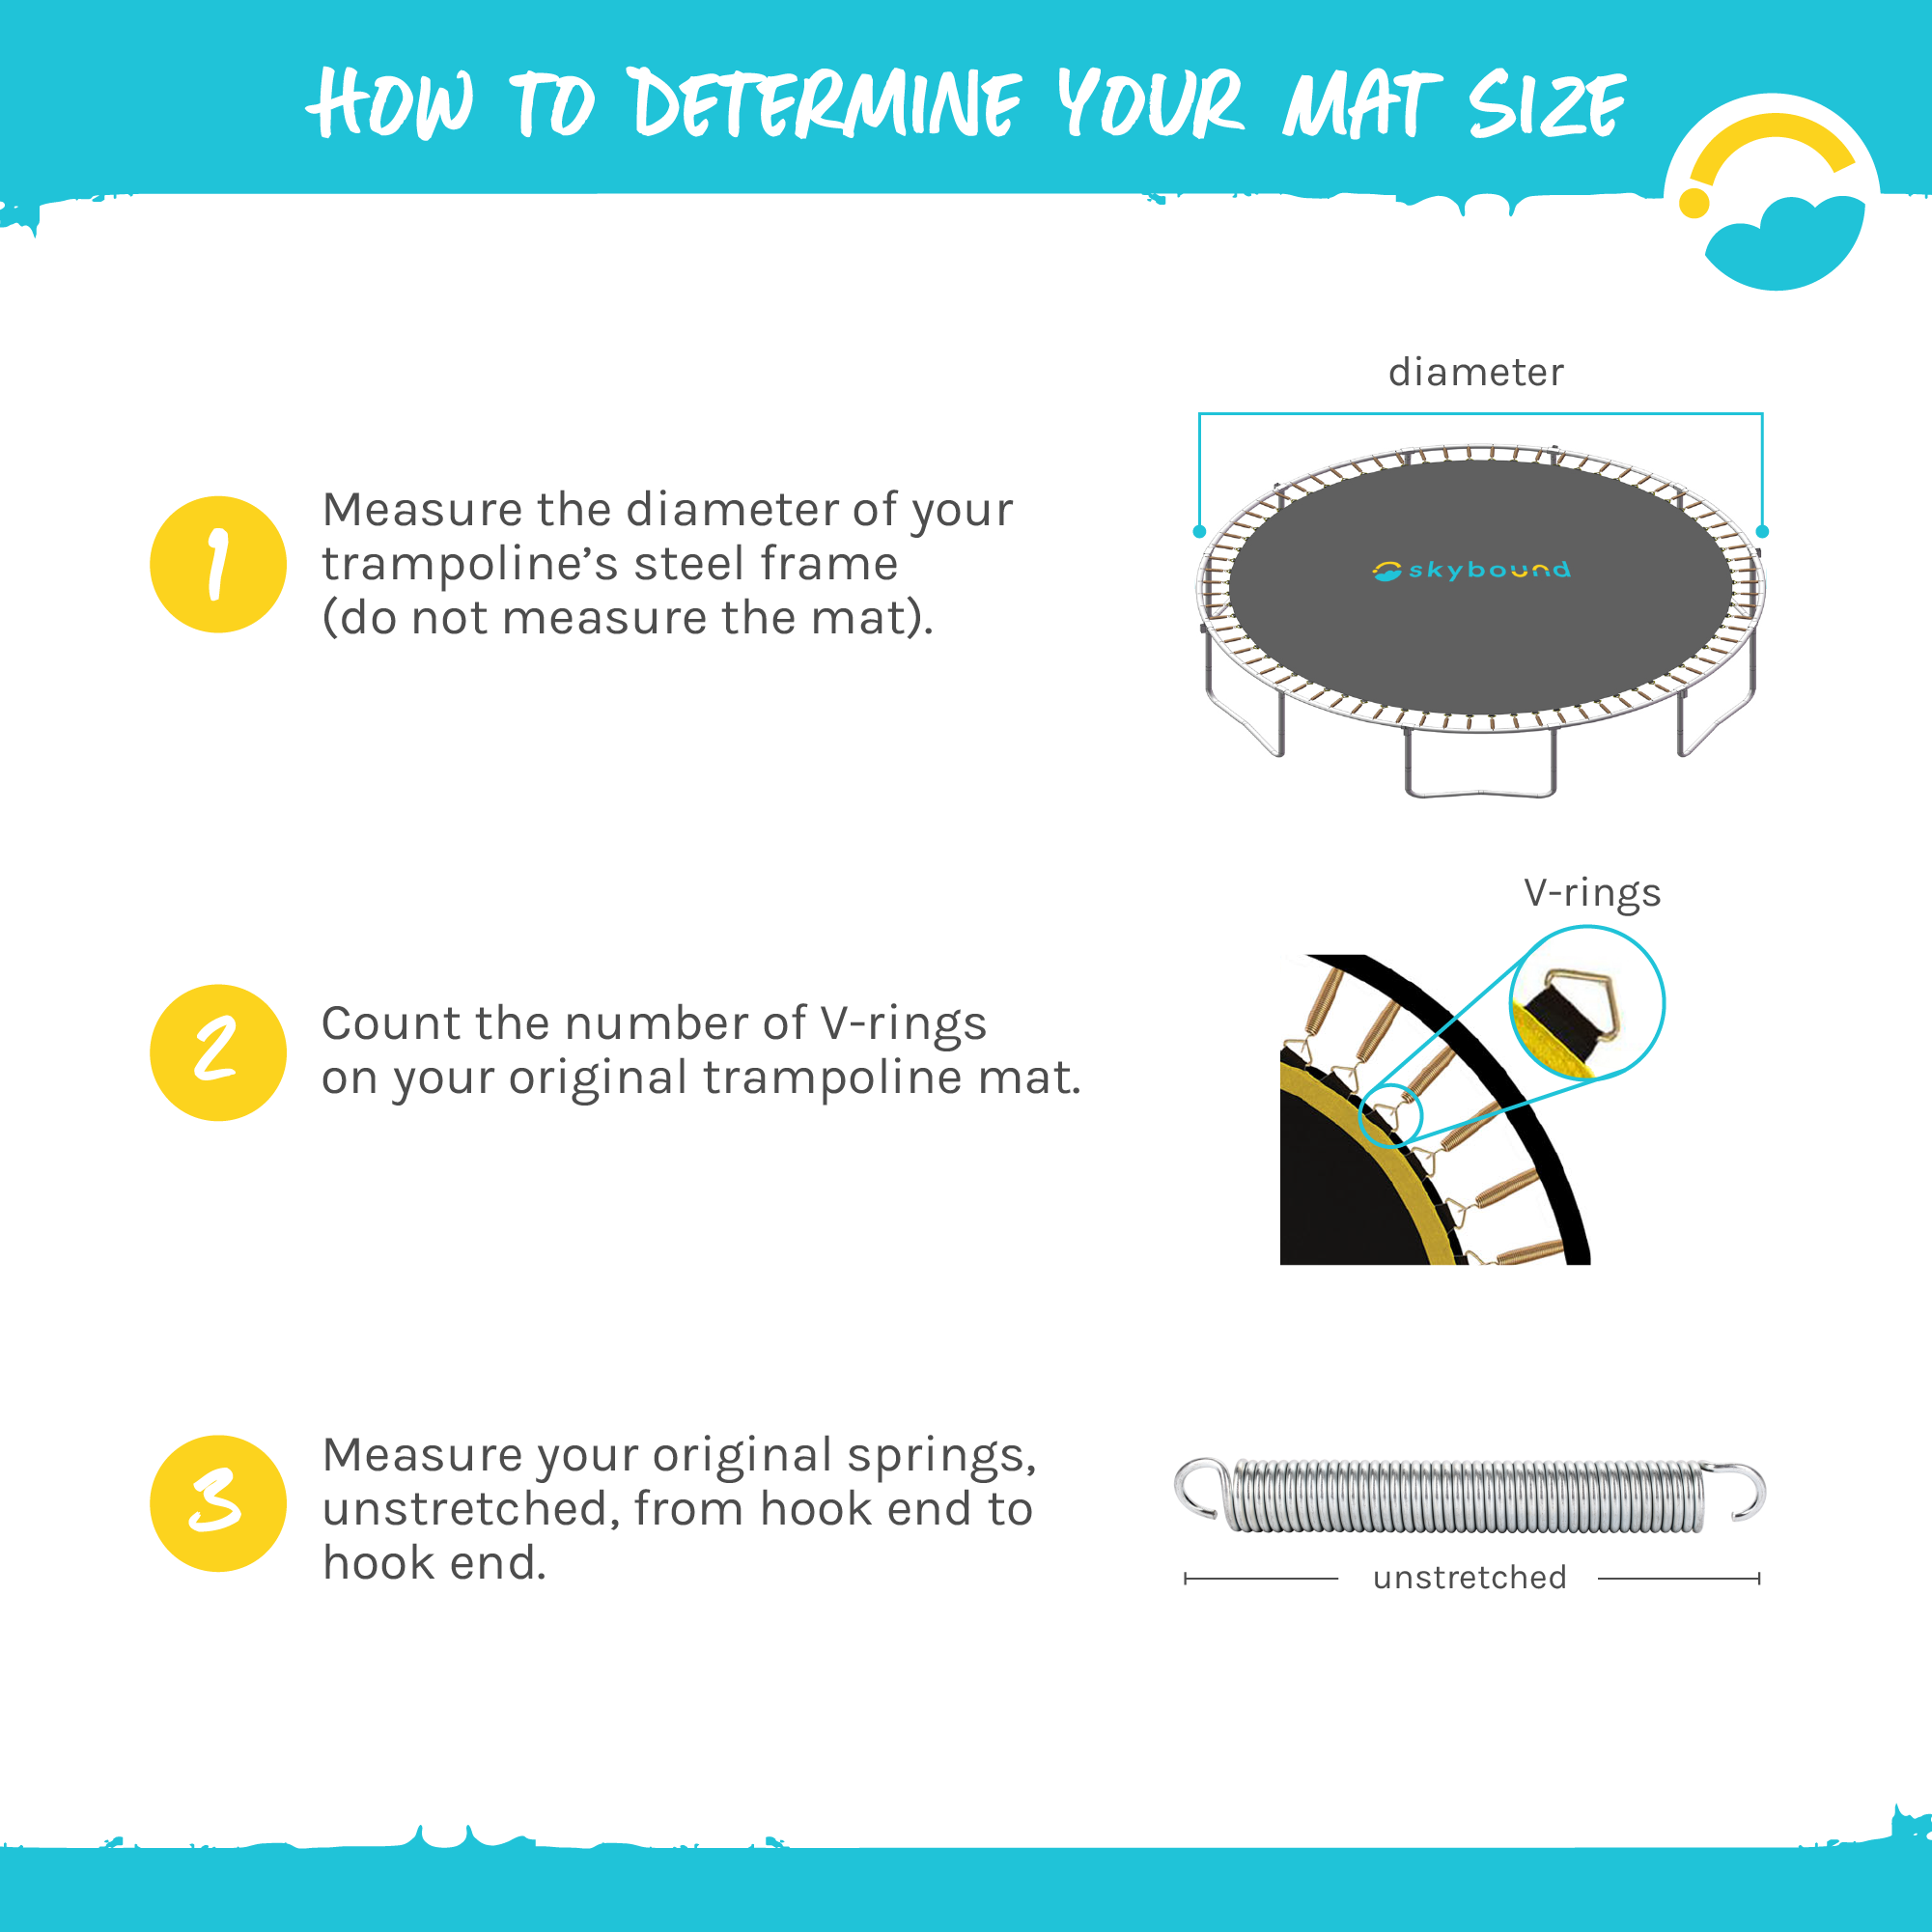 How to Determine Your Mat Size: 1-Measure the diameter of your trampoline's steel frame (do not measure the mat).  2-Count the number of V-Rings on your original trampoline mat.  3-Measure your original springs, upstretched, from hook end to hook end.  